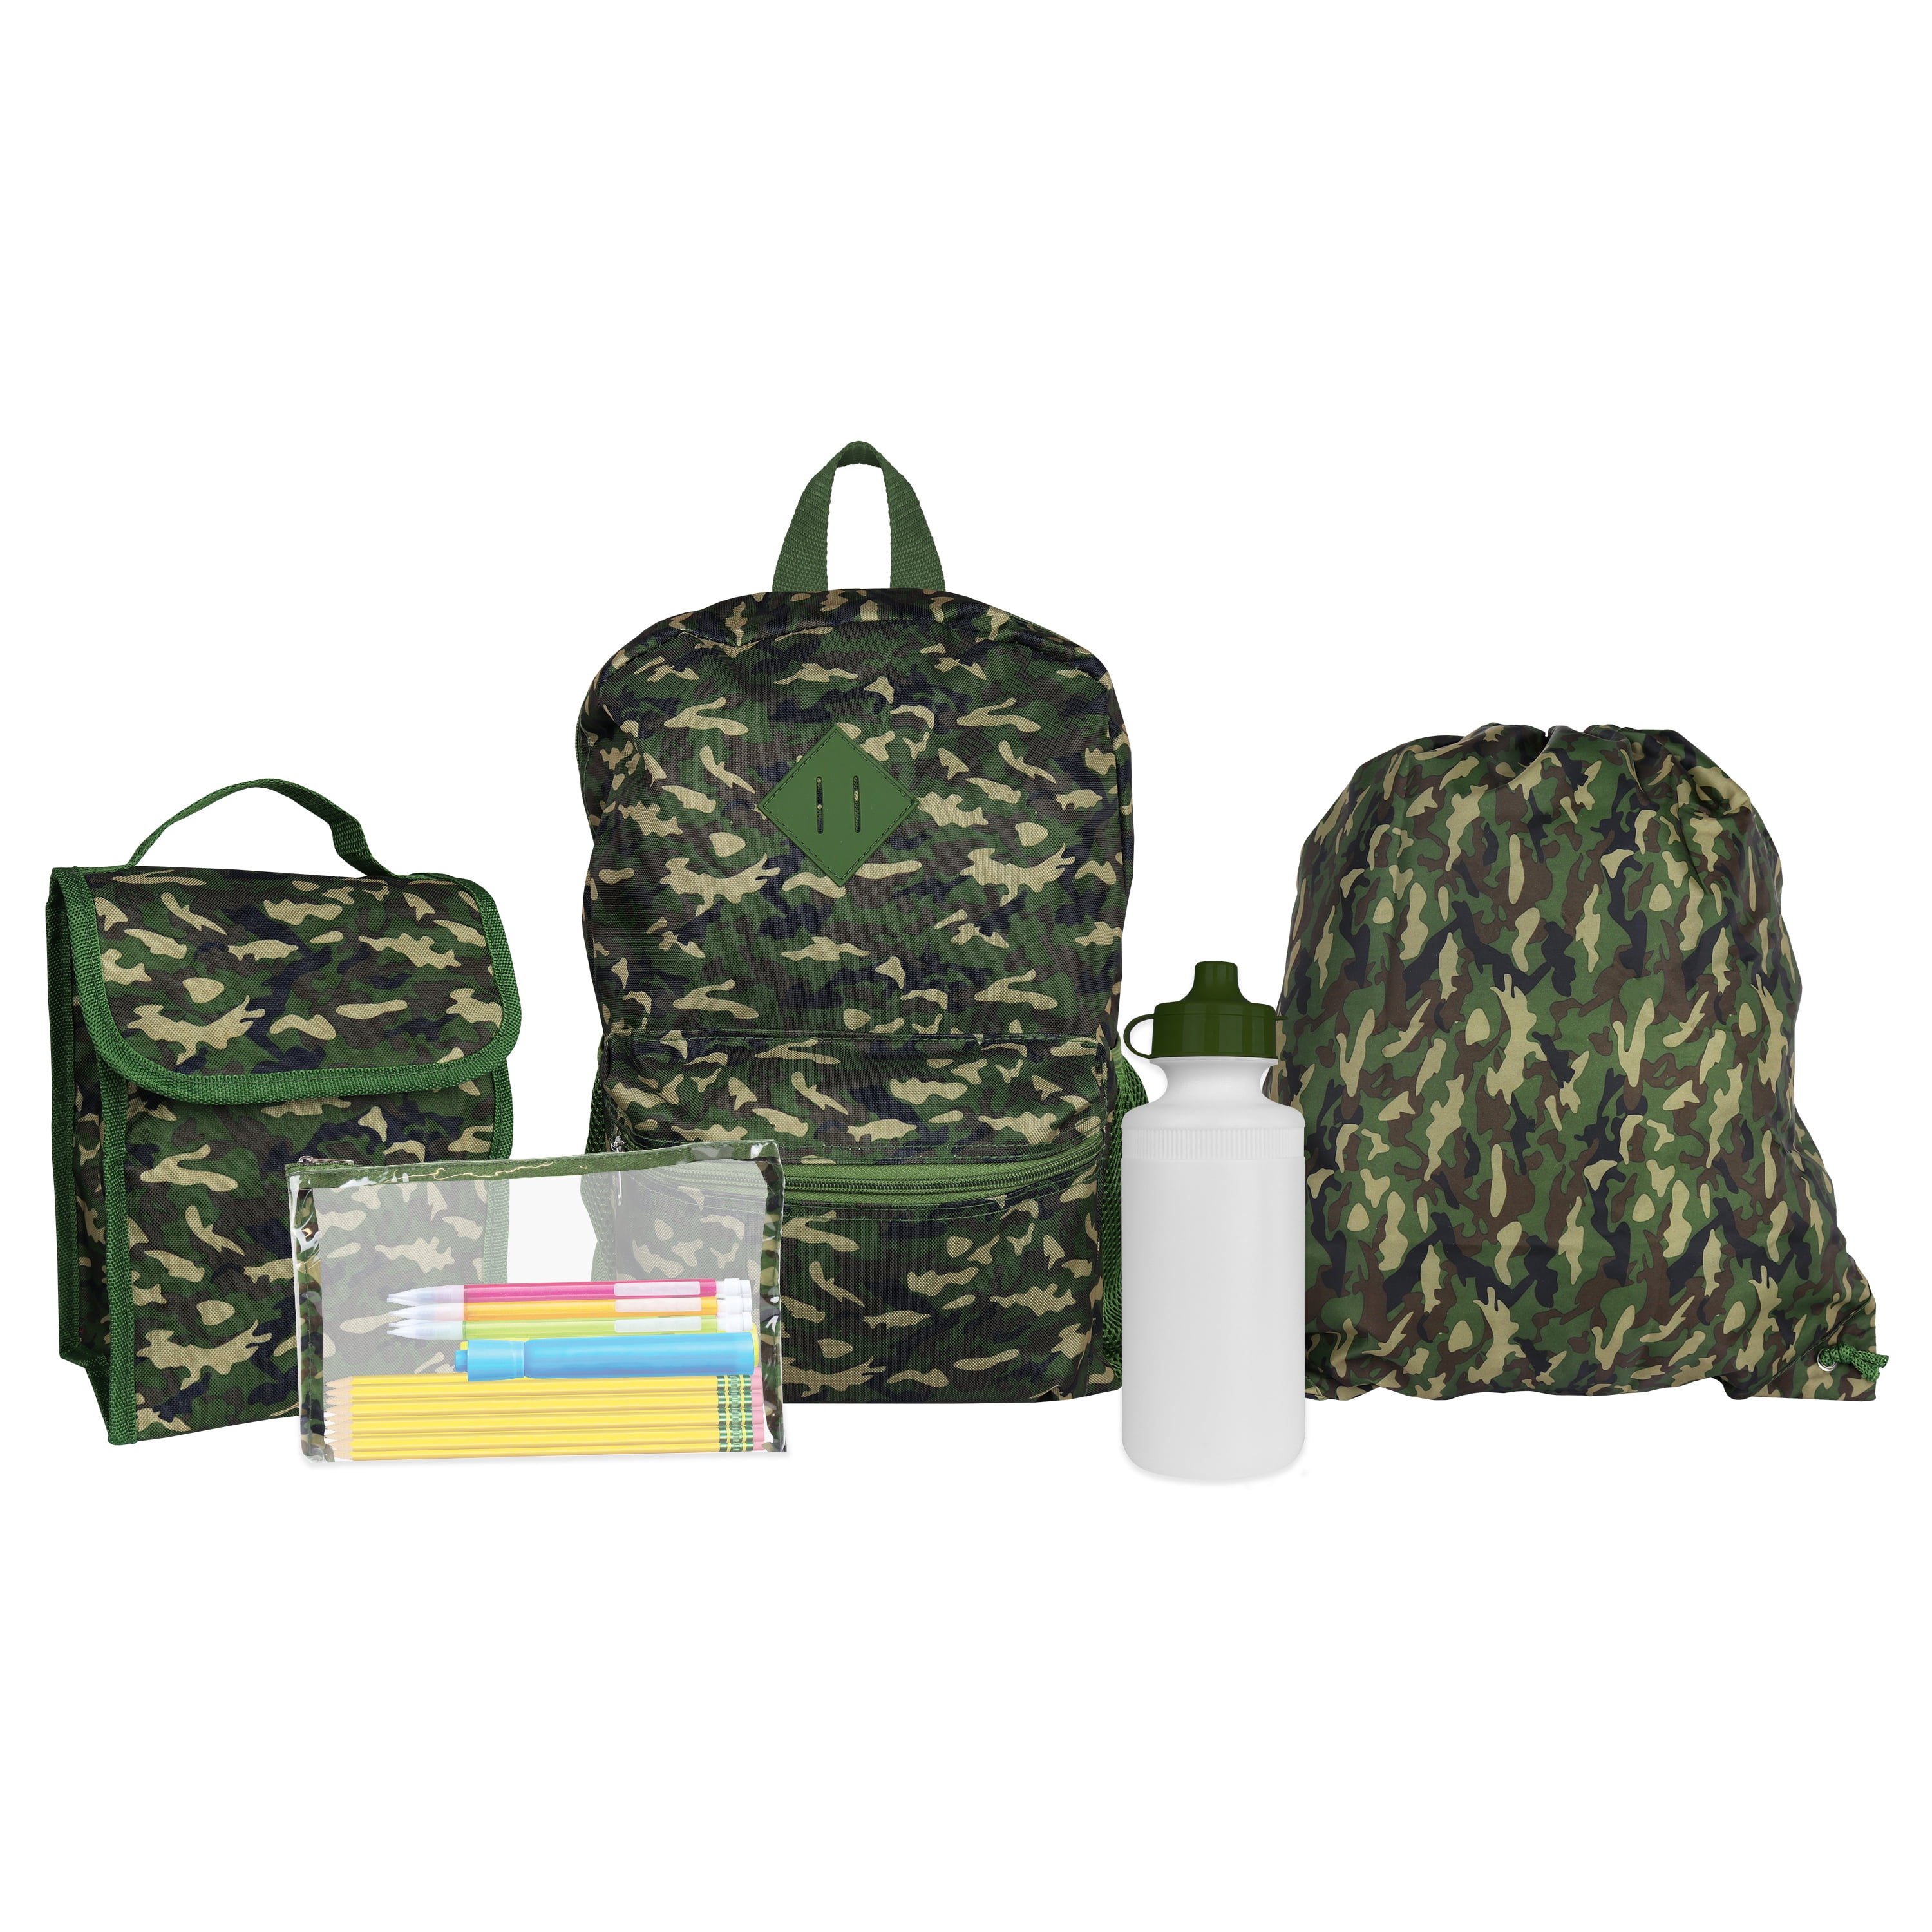 Kids Backpack with Lunch Box with Water Bottle Holder Camo Deer School Bag  Set for Boys GirlLunch Bag Pencil Case Mochilas Escolares Para Ni?as